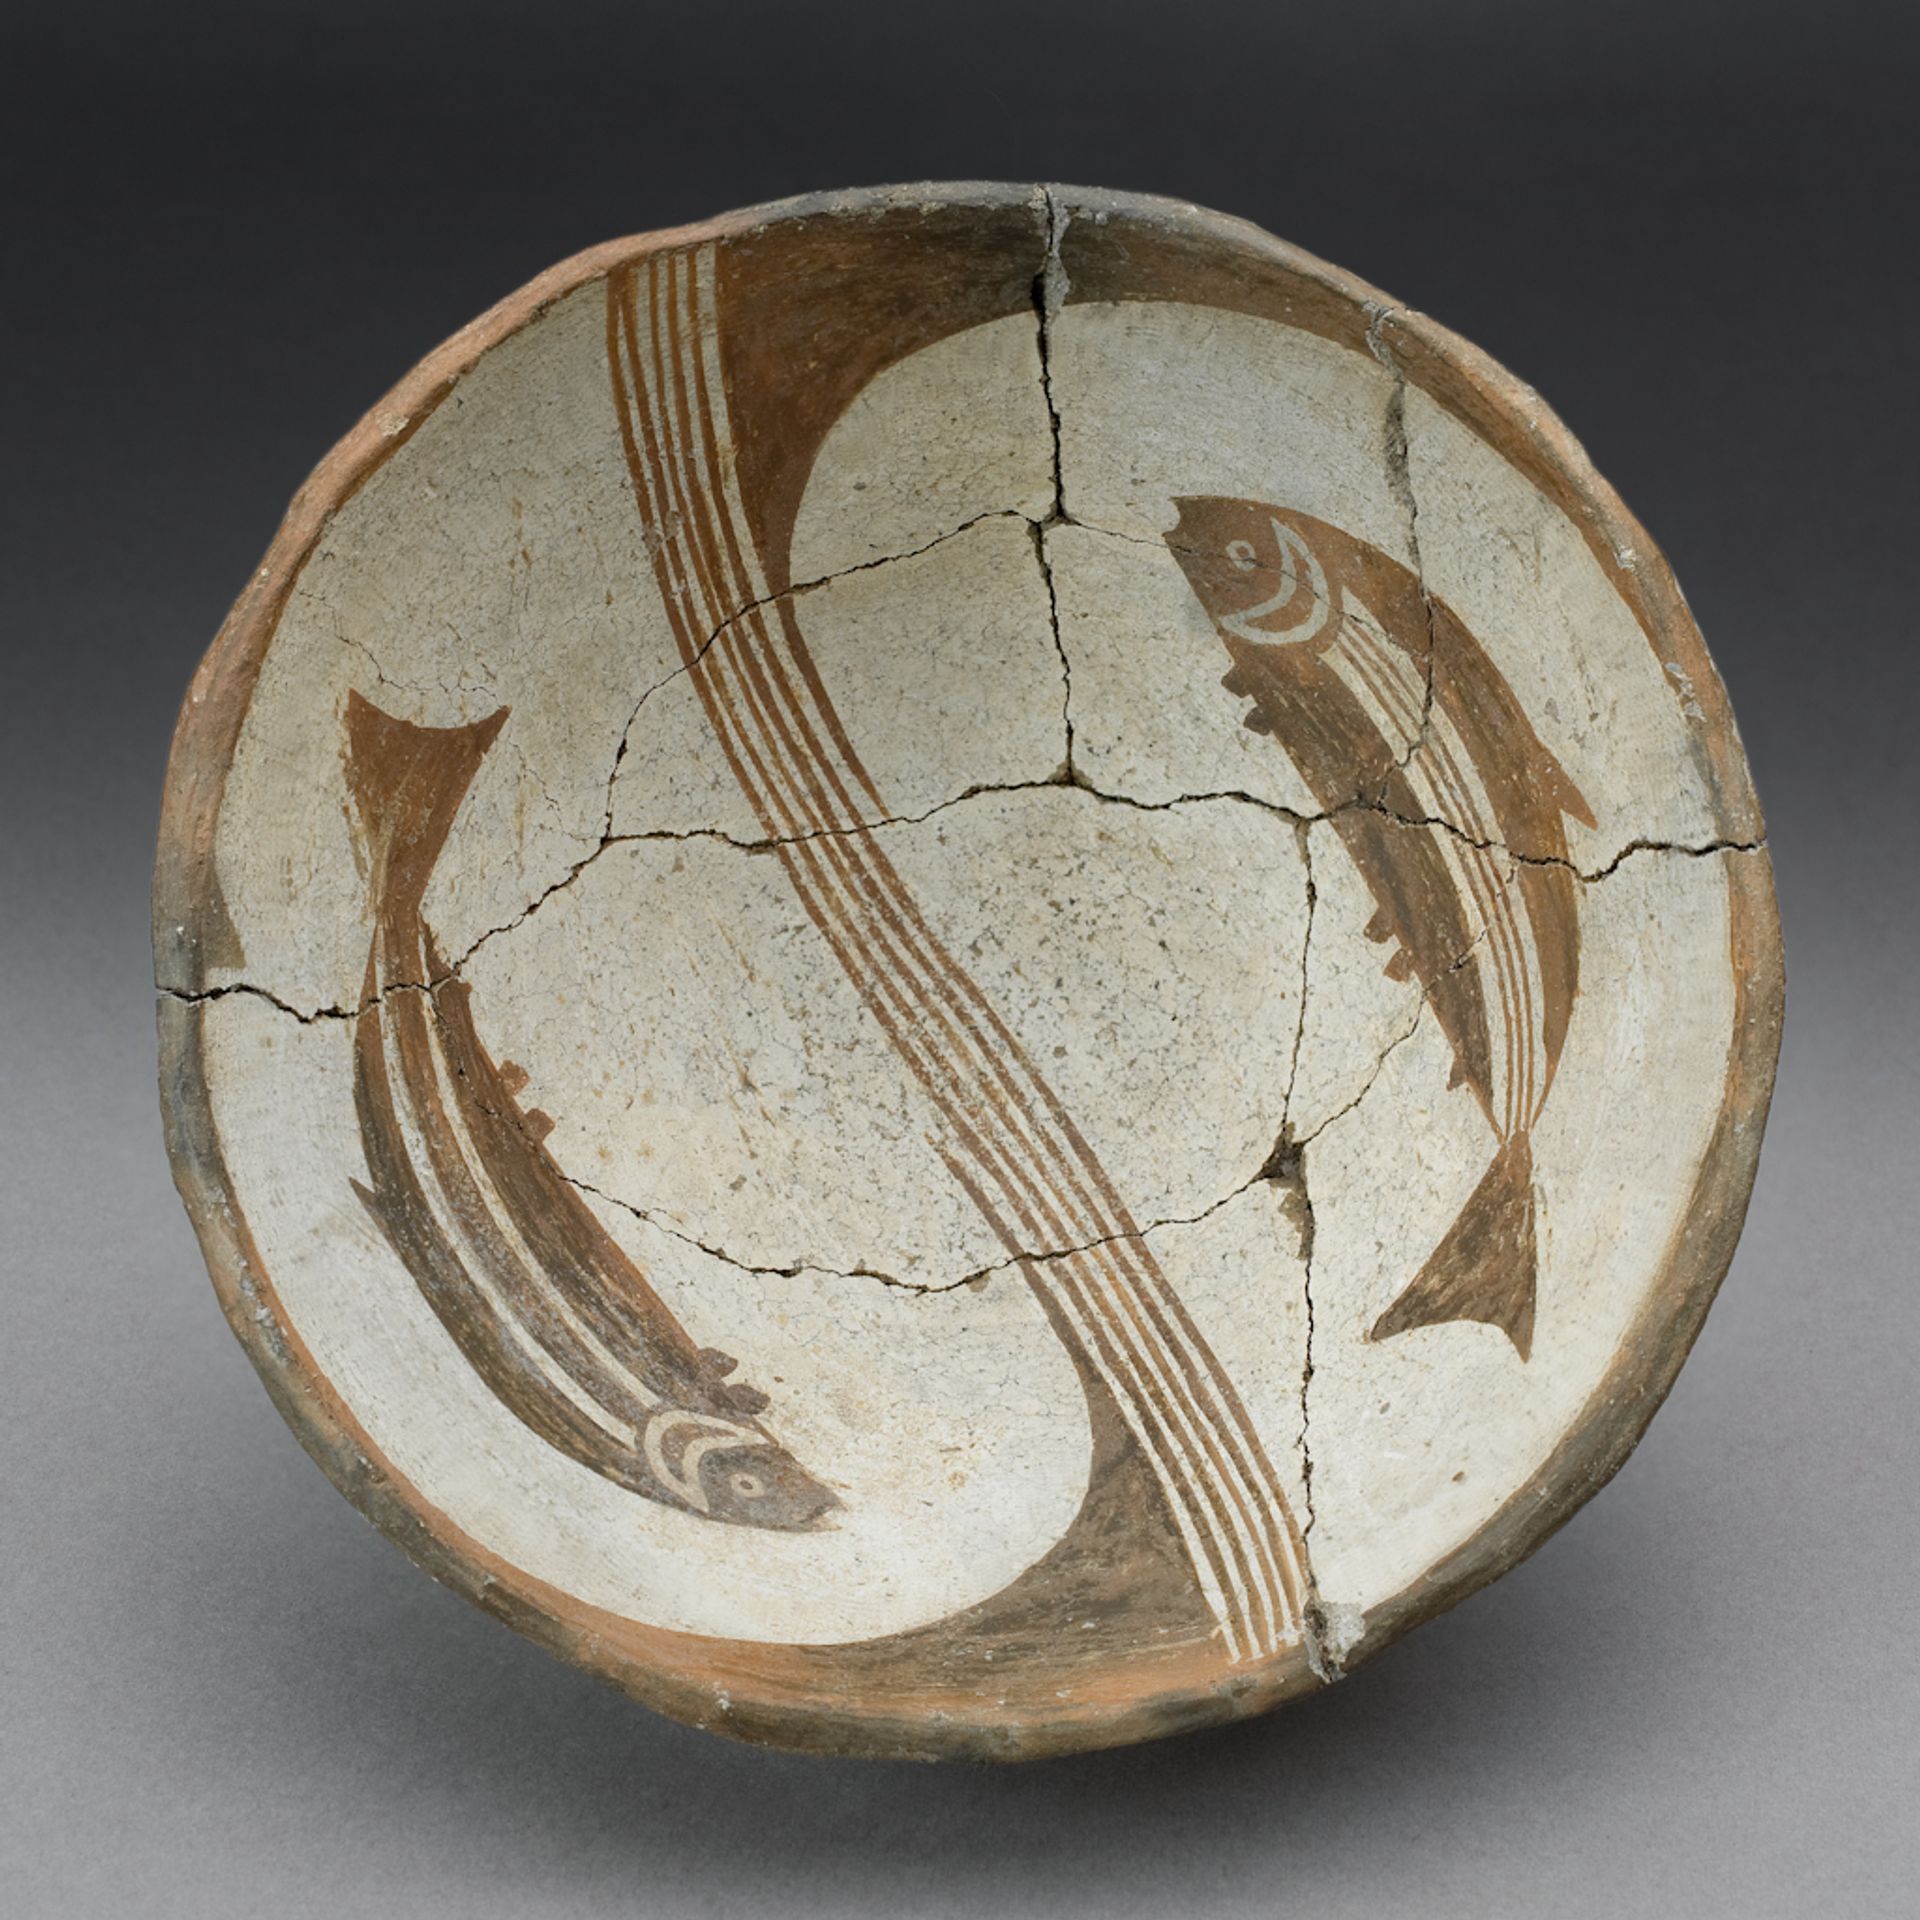 A Mimbres funerary bowl. Courtesy of Weisman Art Museum